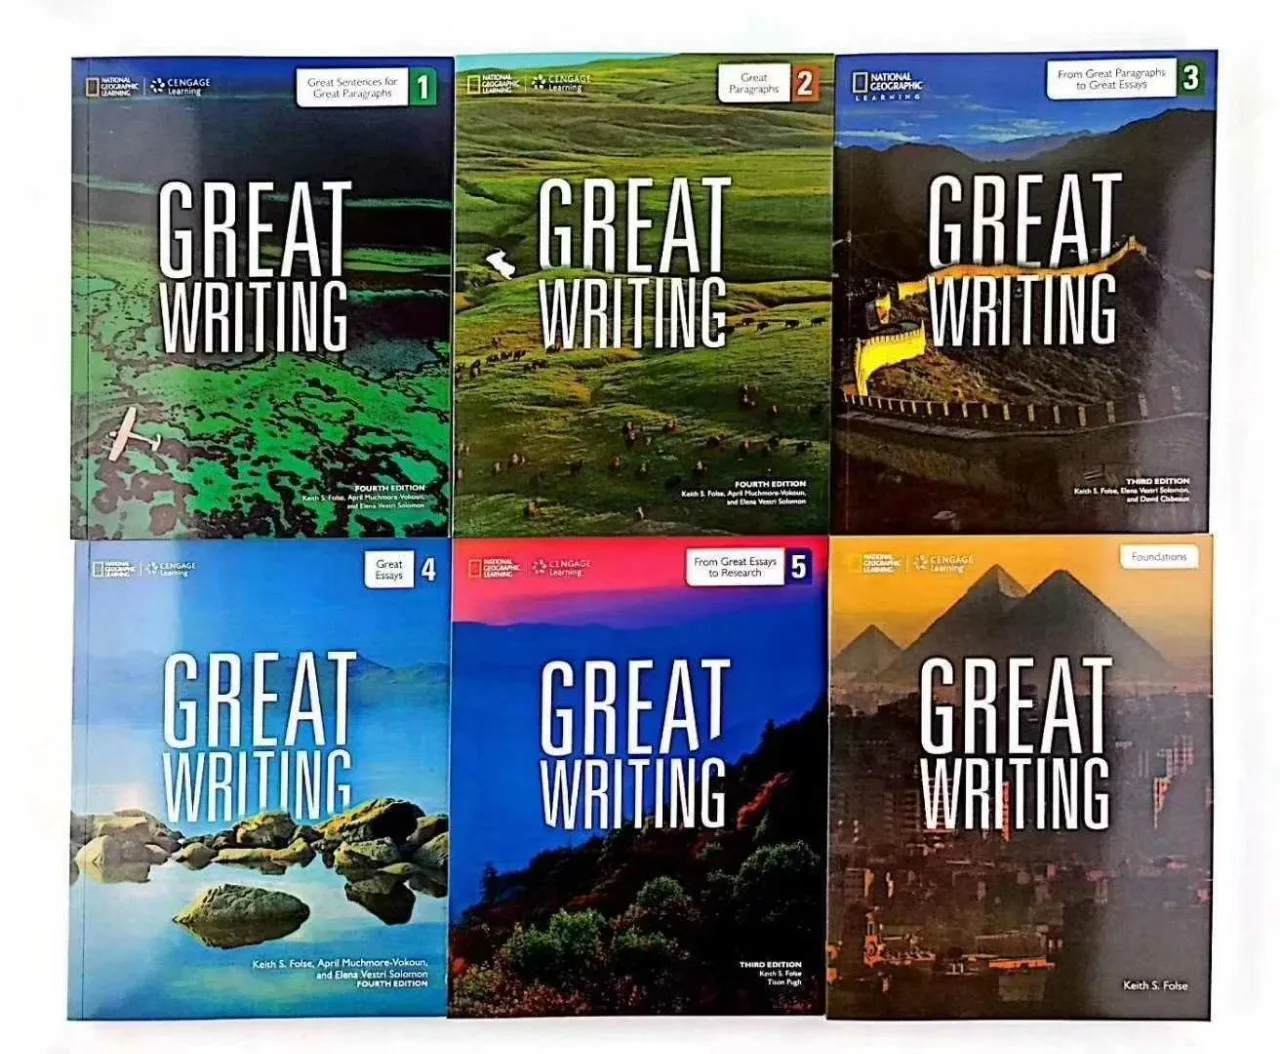 Ability　Vocabulary　Enhancement　Languages　Textbook　Geographic　Book　Learning　Great　Grammar　Ngl　Writing　English　6pcs/set　AliExpress